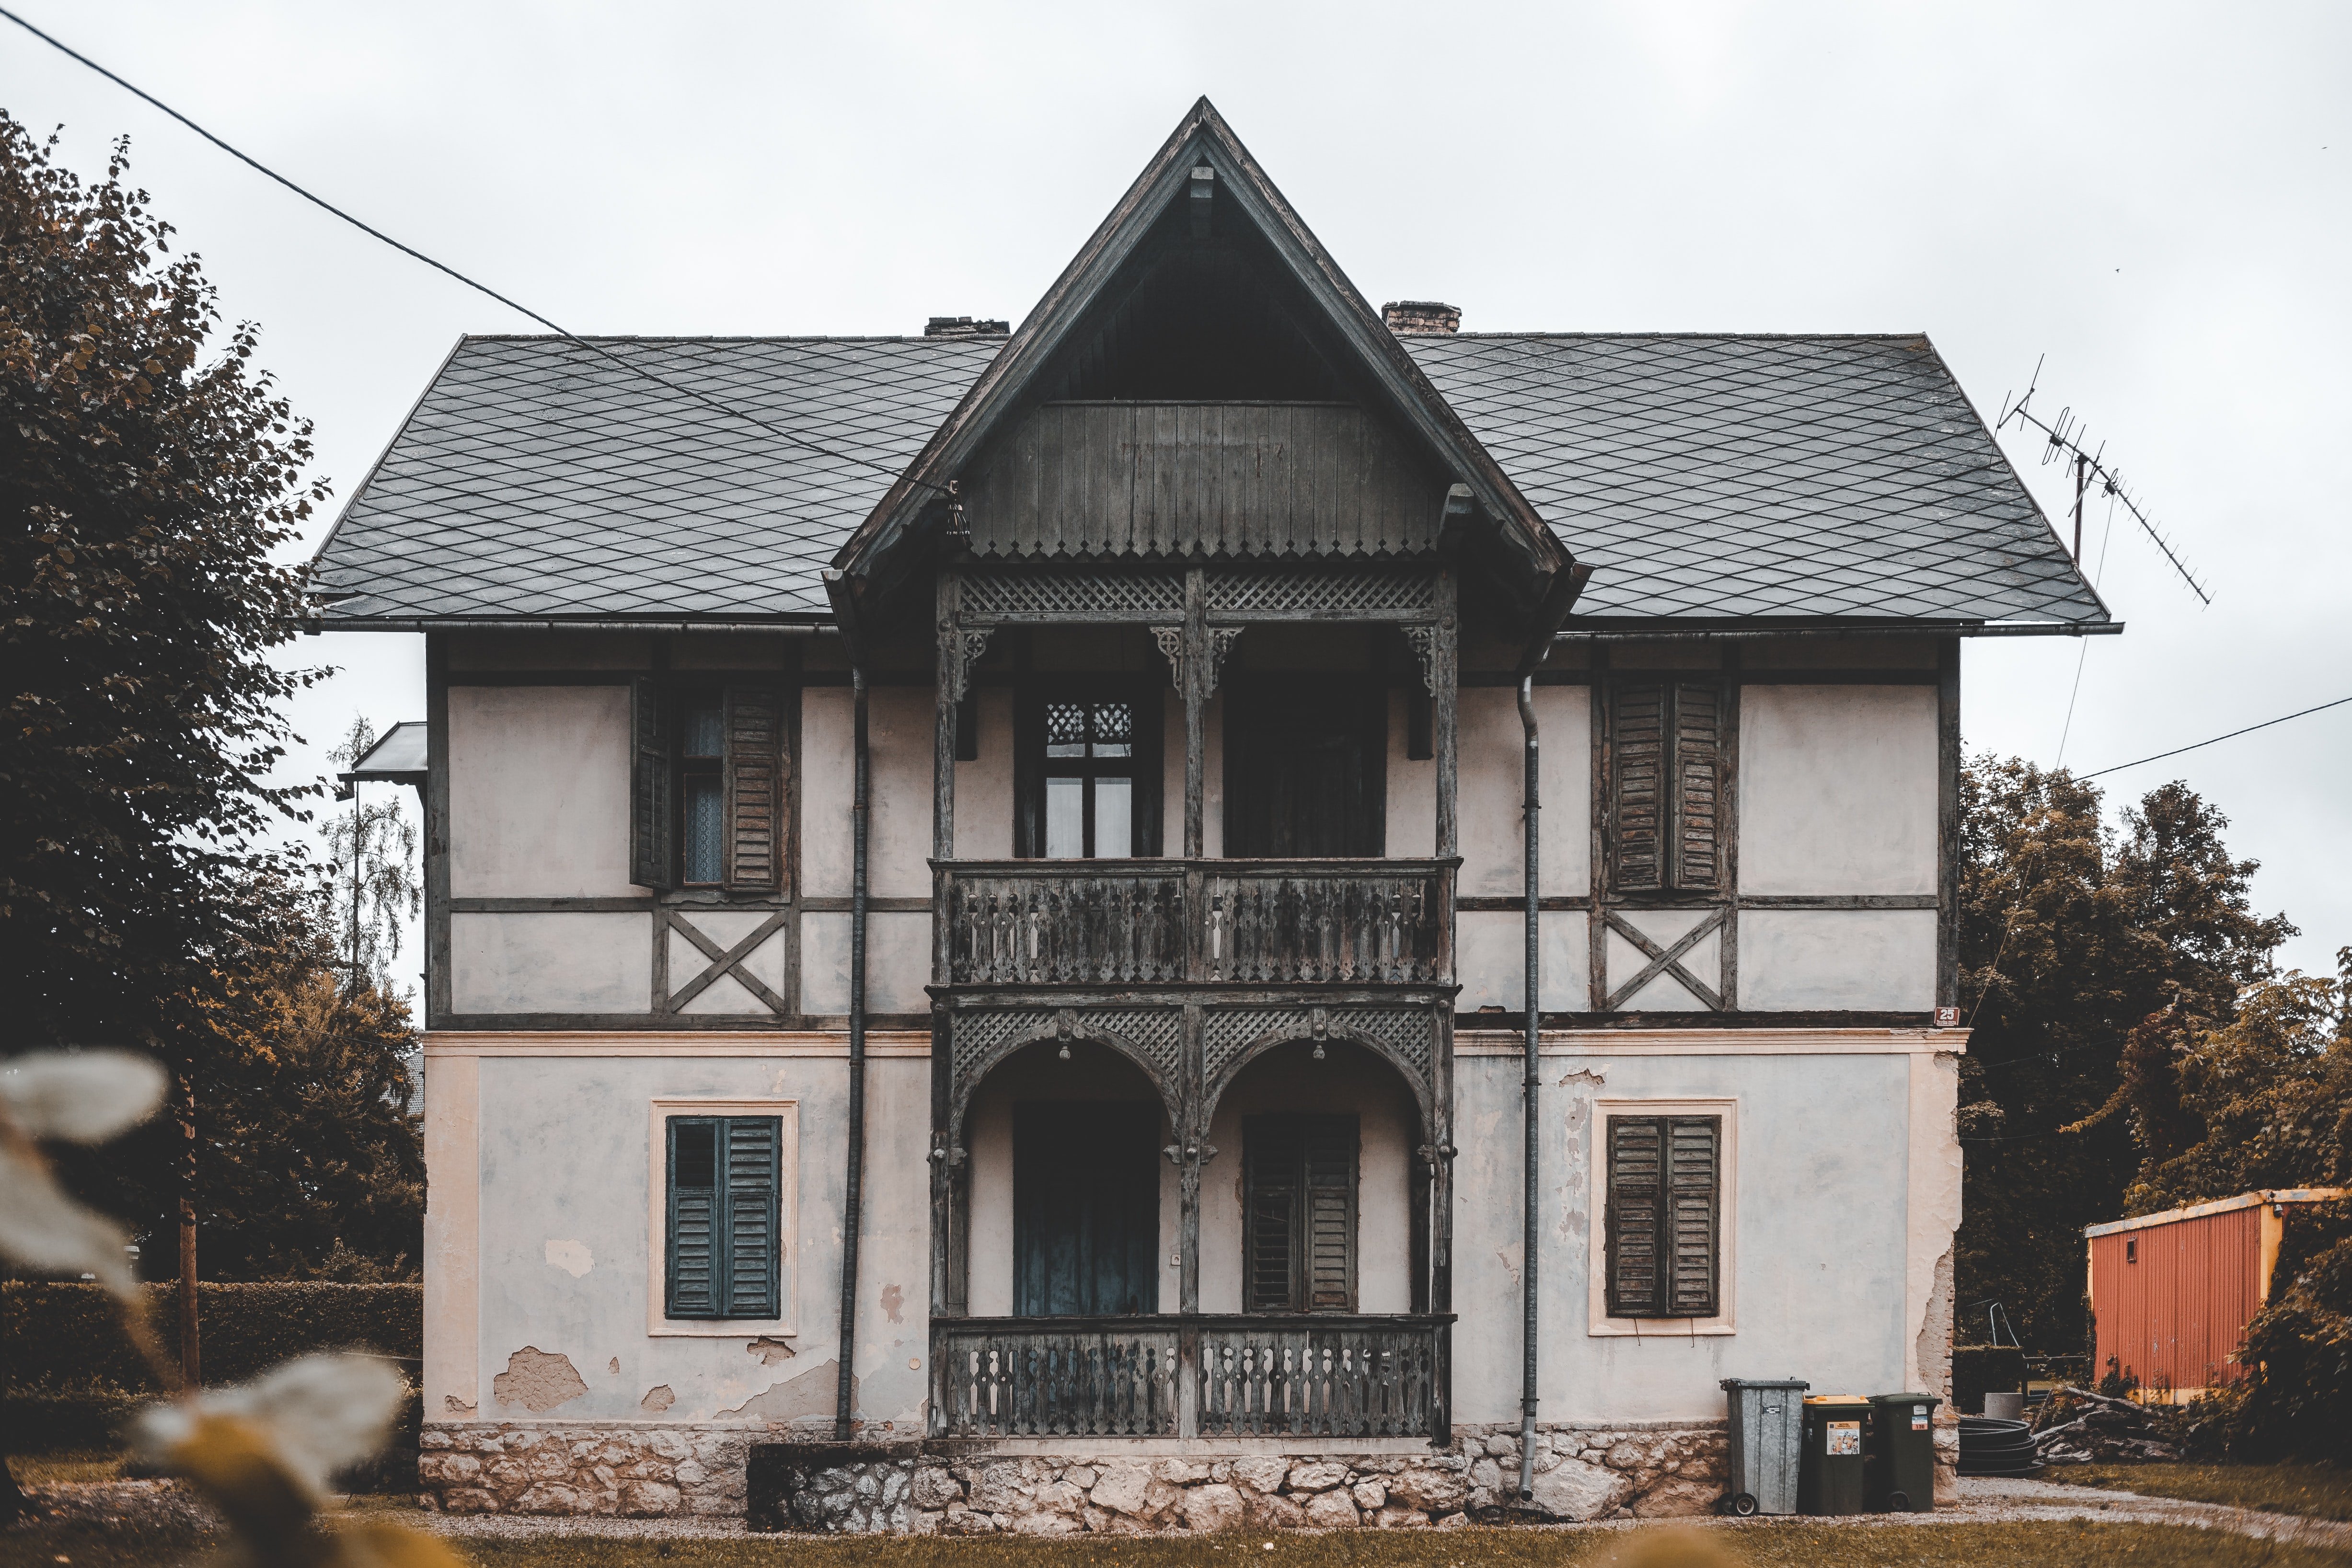 Chris dropped the food packet at an old house | Photo: Unsplash